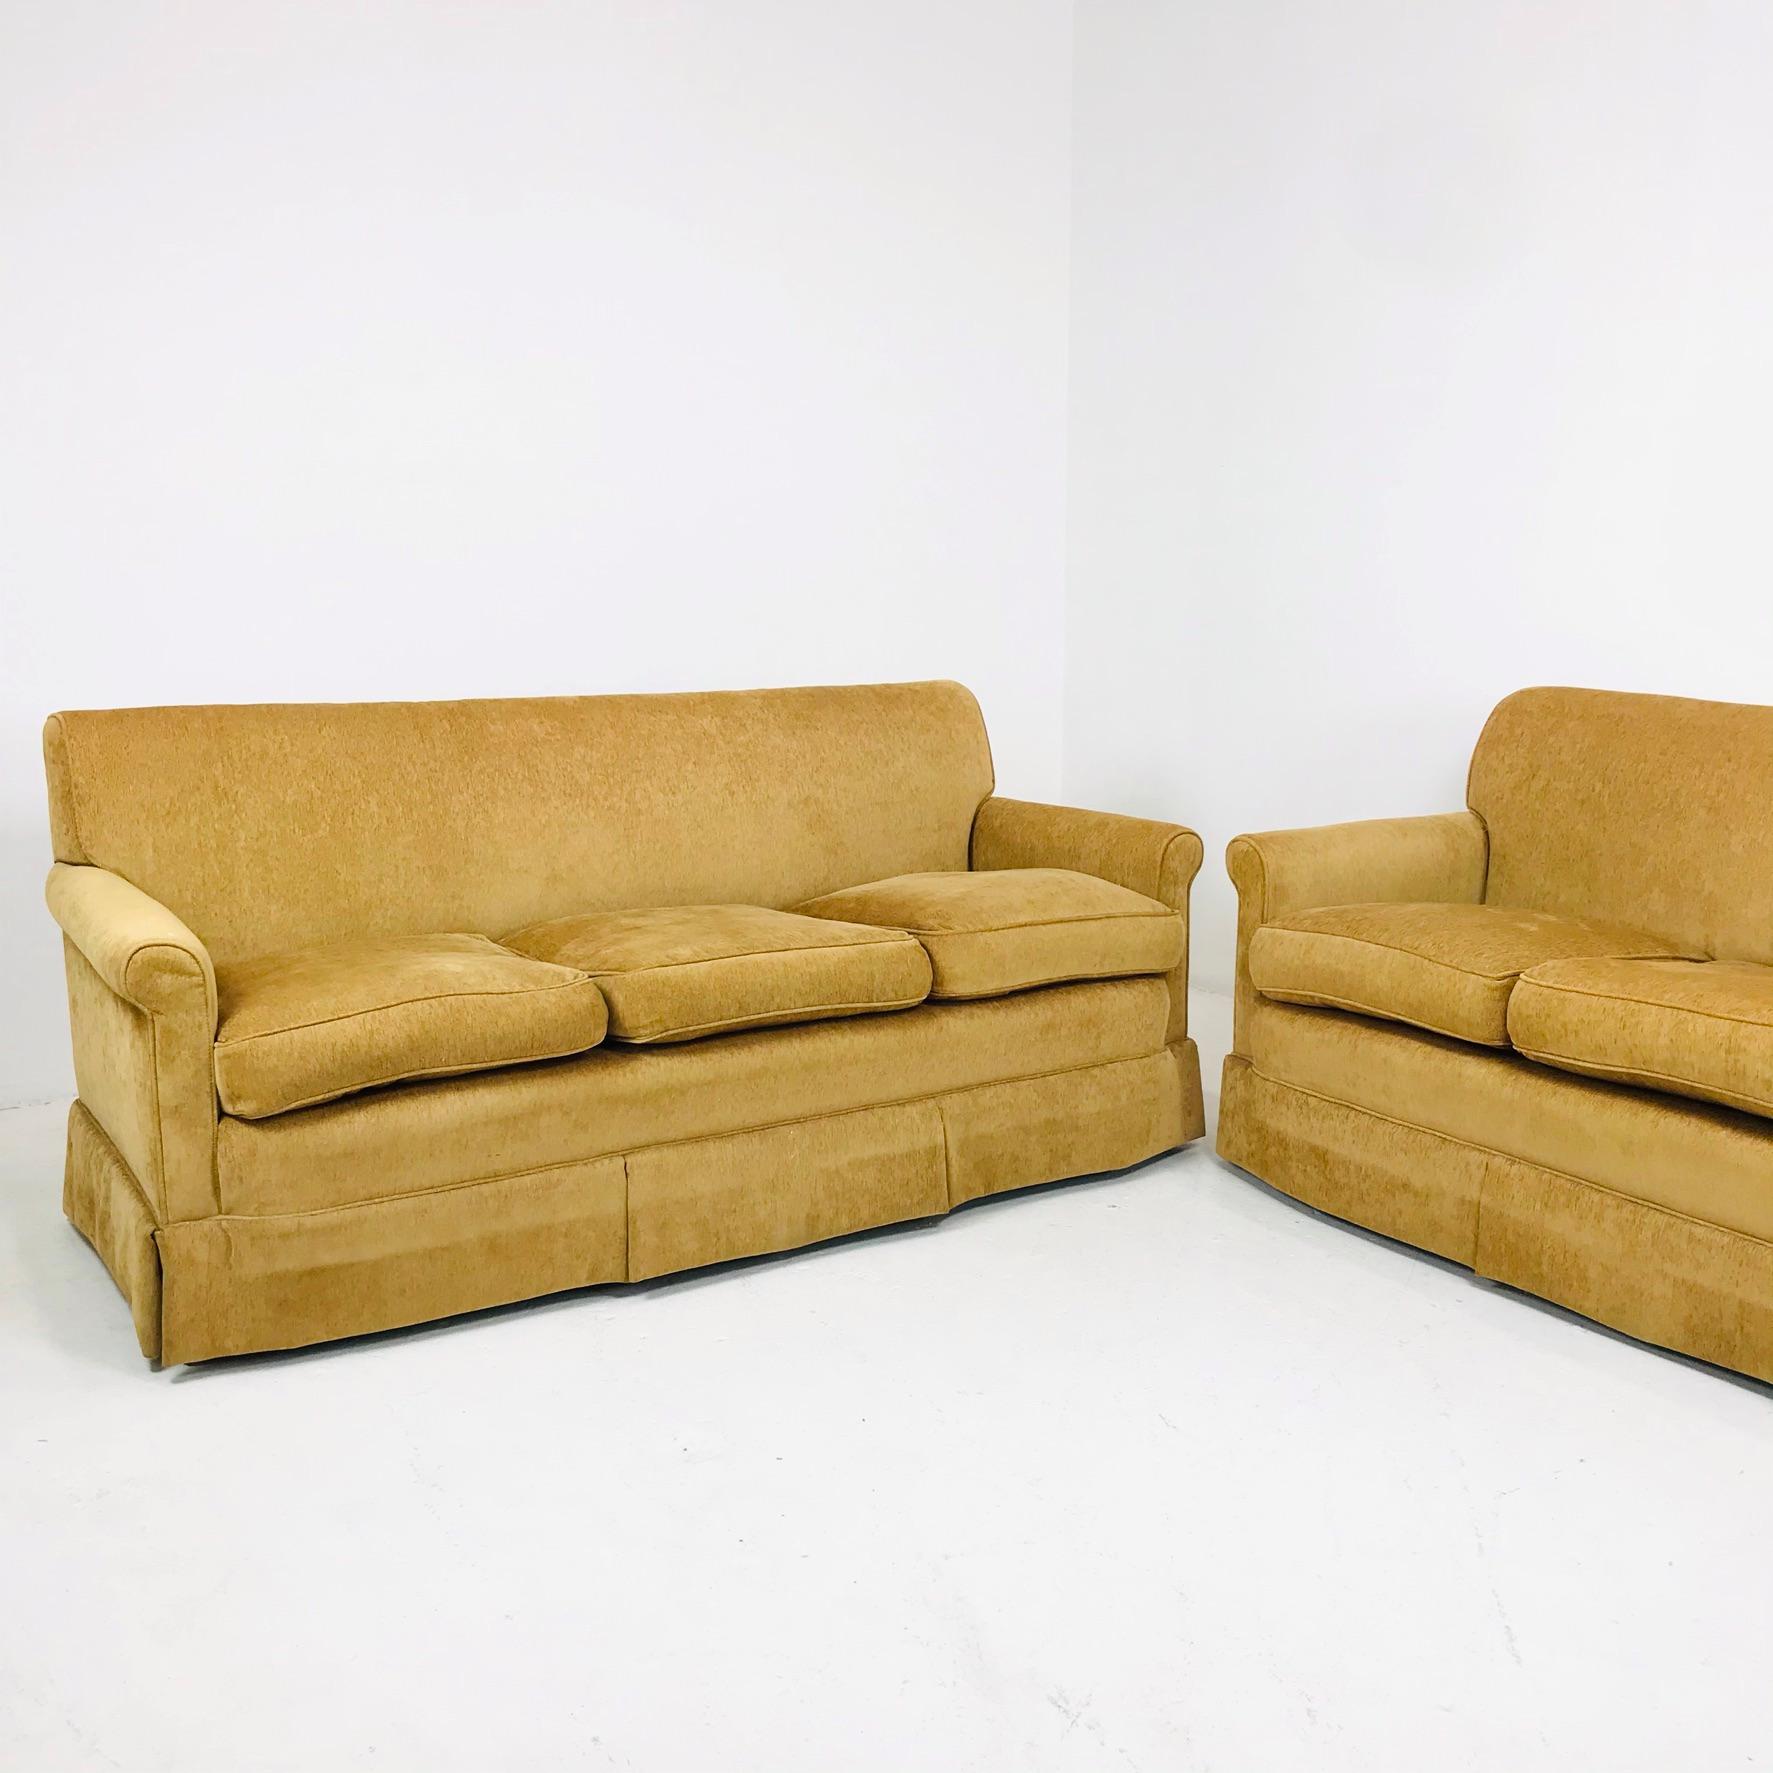 1960s Custom Slipcovered Sofa by DeAngelis for Billy Baldwin In Good Condition For Sale In Dallas, TX